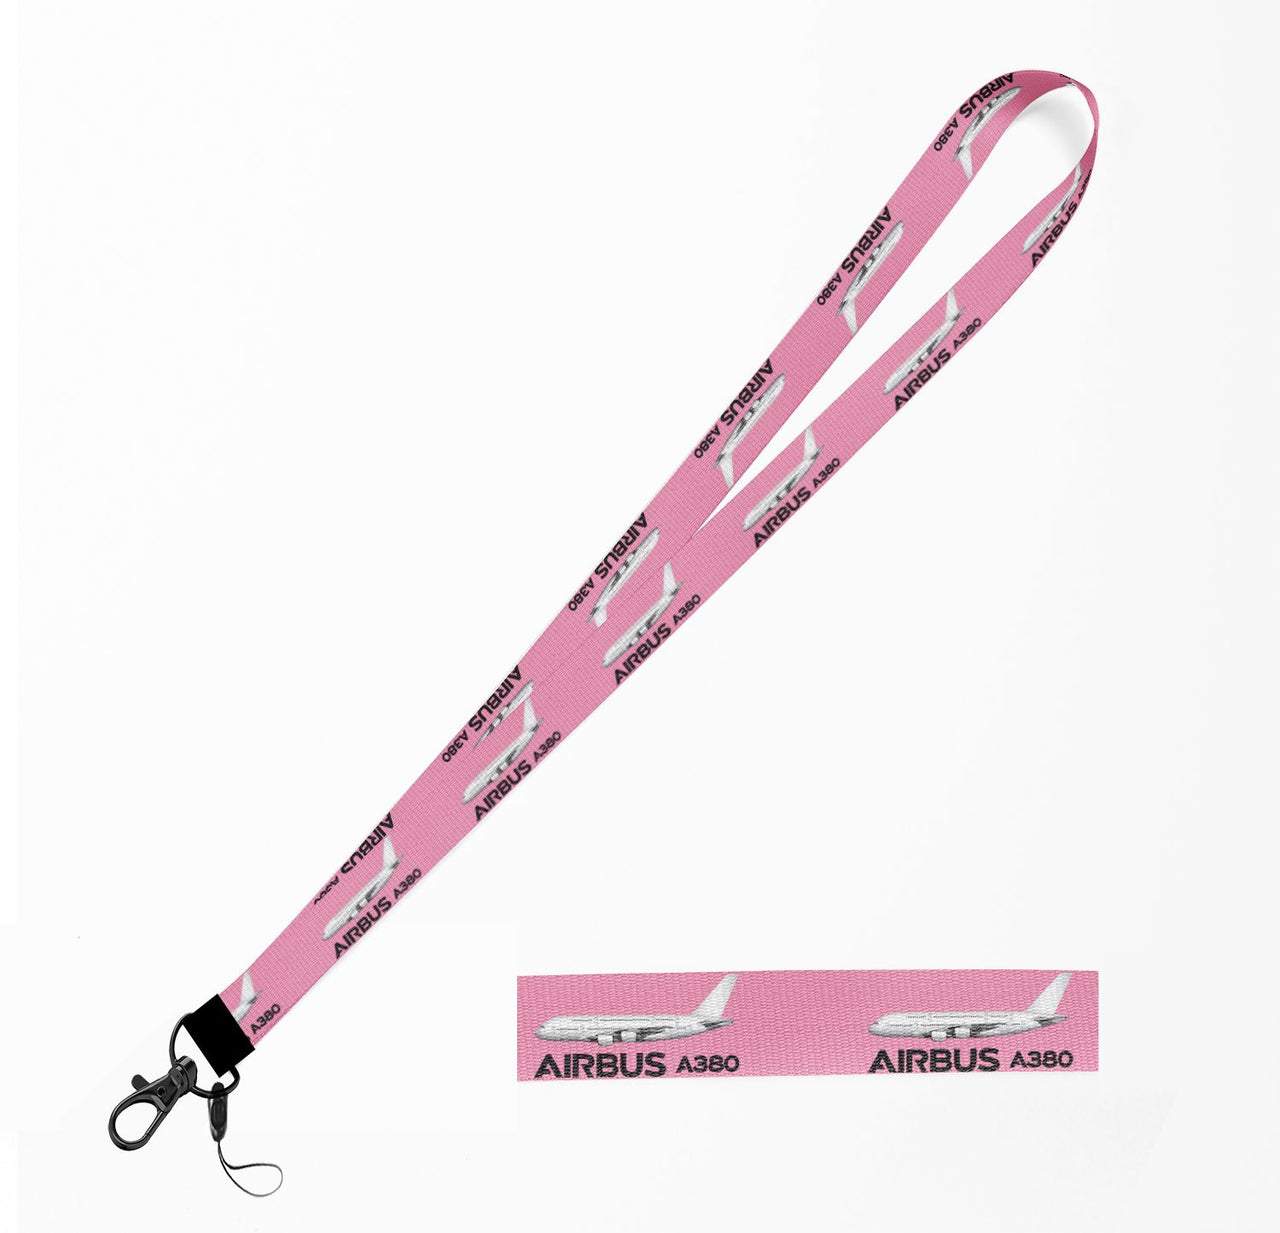 The Airbus A380 Designed Lanyard & ID Holders